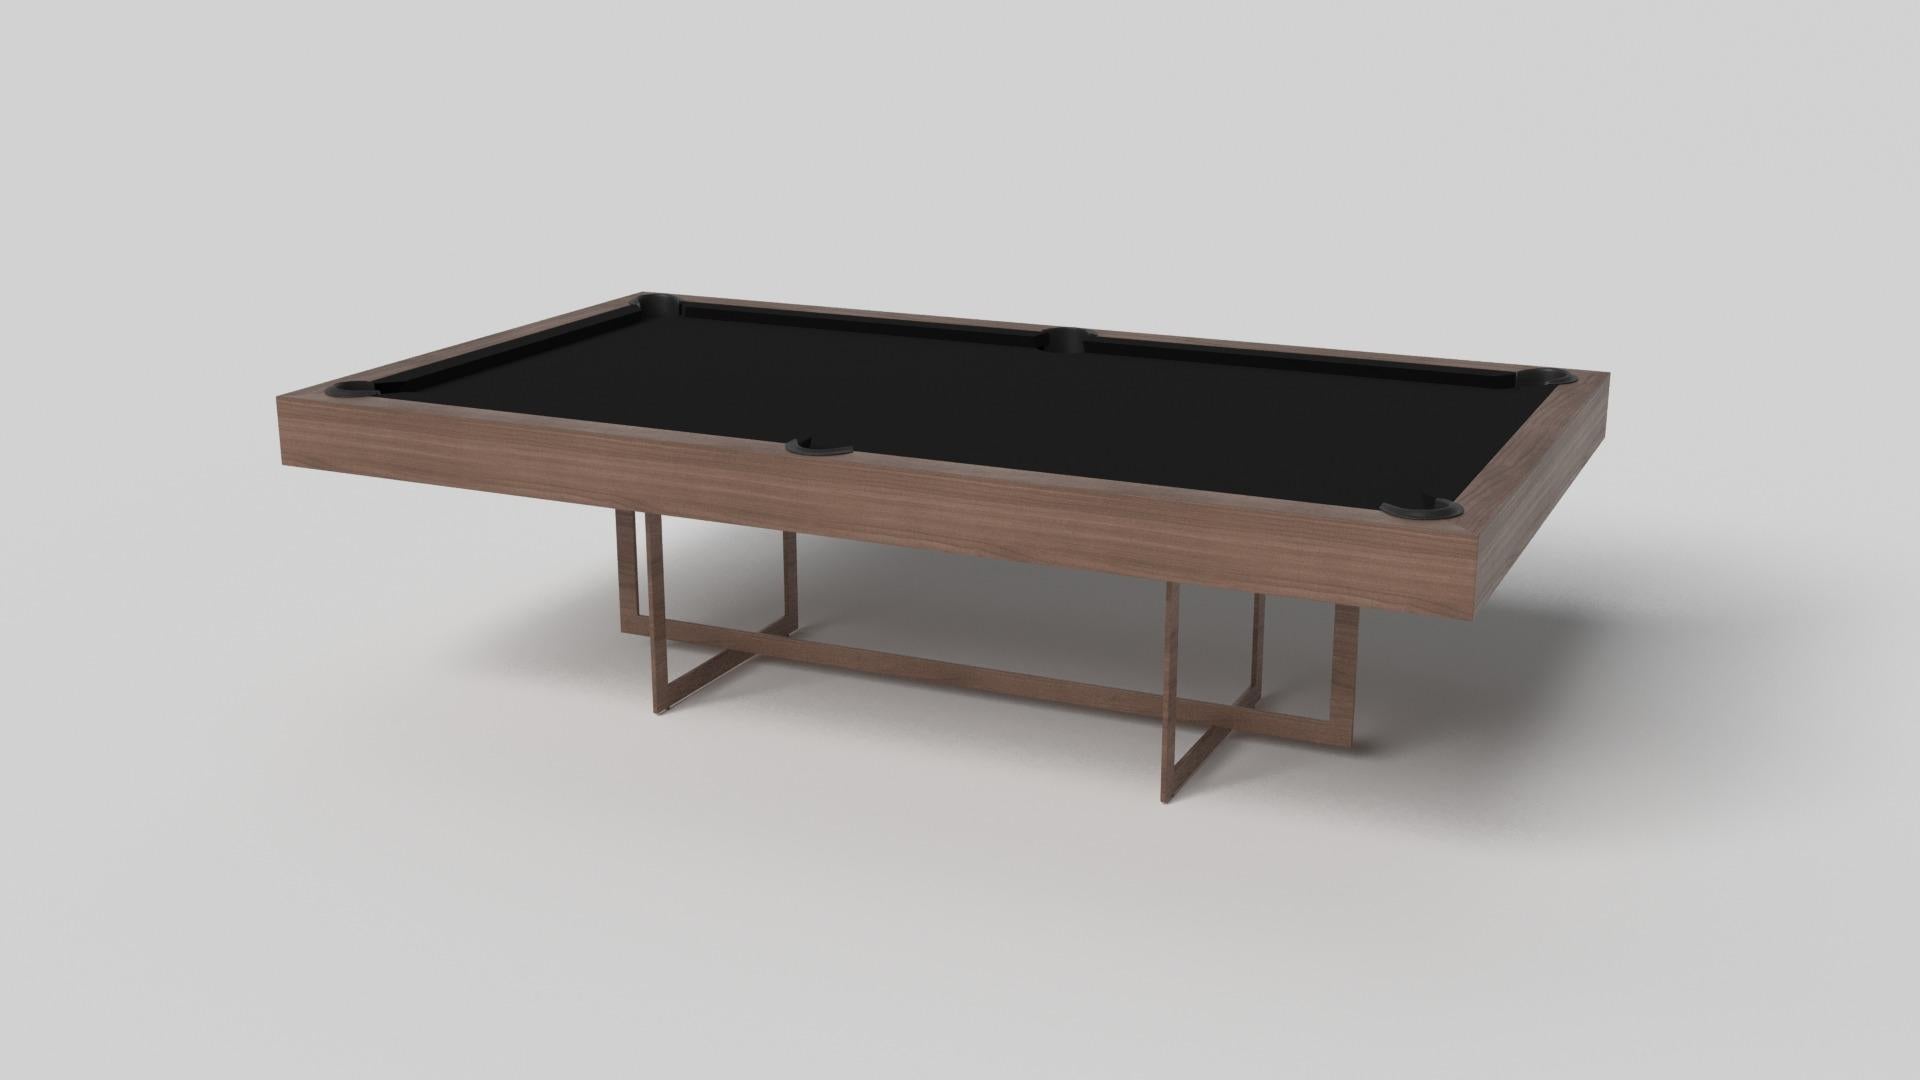 With an open metal foundation, our Beso table is a unique expression of contemporary forms and negative space. This pool table is handcrafted by our master artisans with a rectangle-in-rectangle base that echoes the angles and edges of a regulation